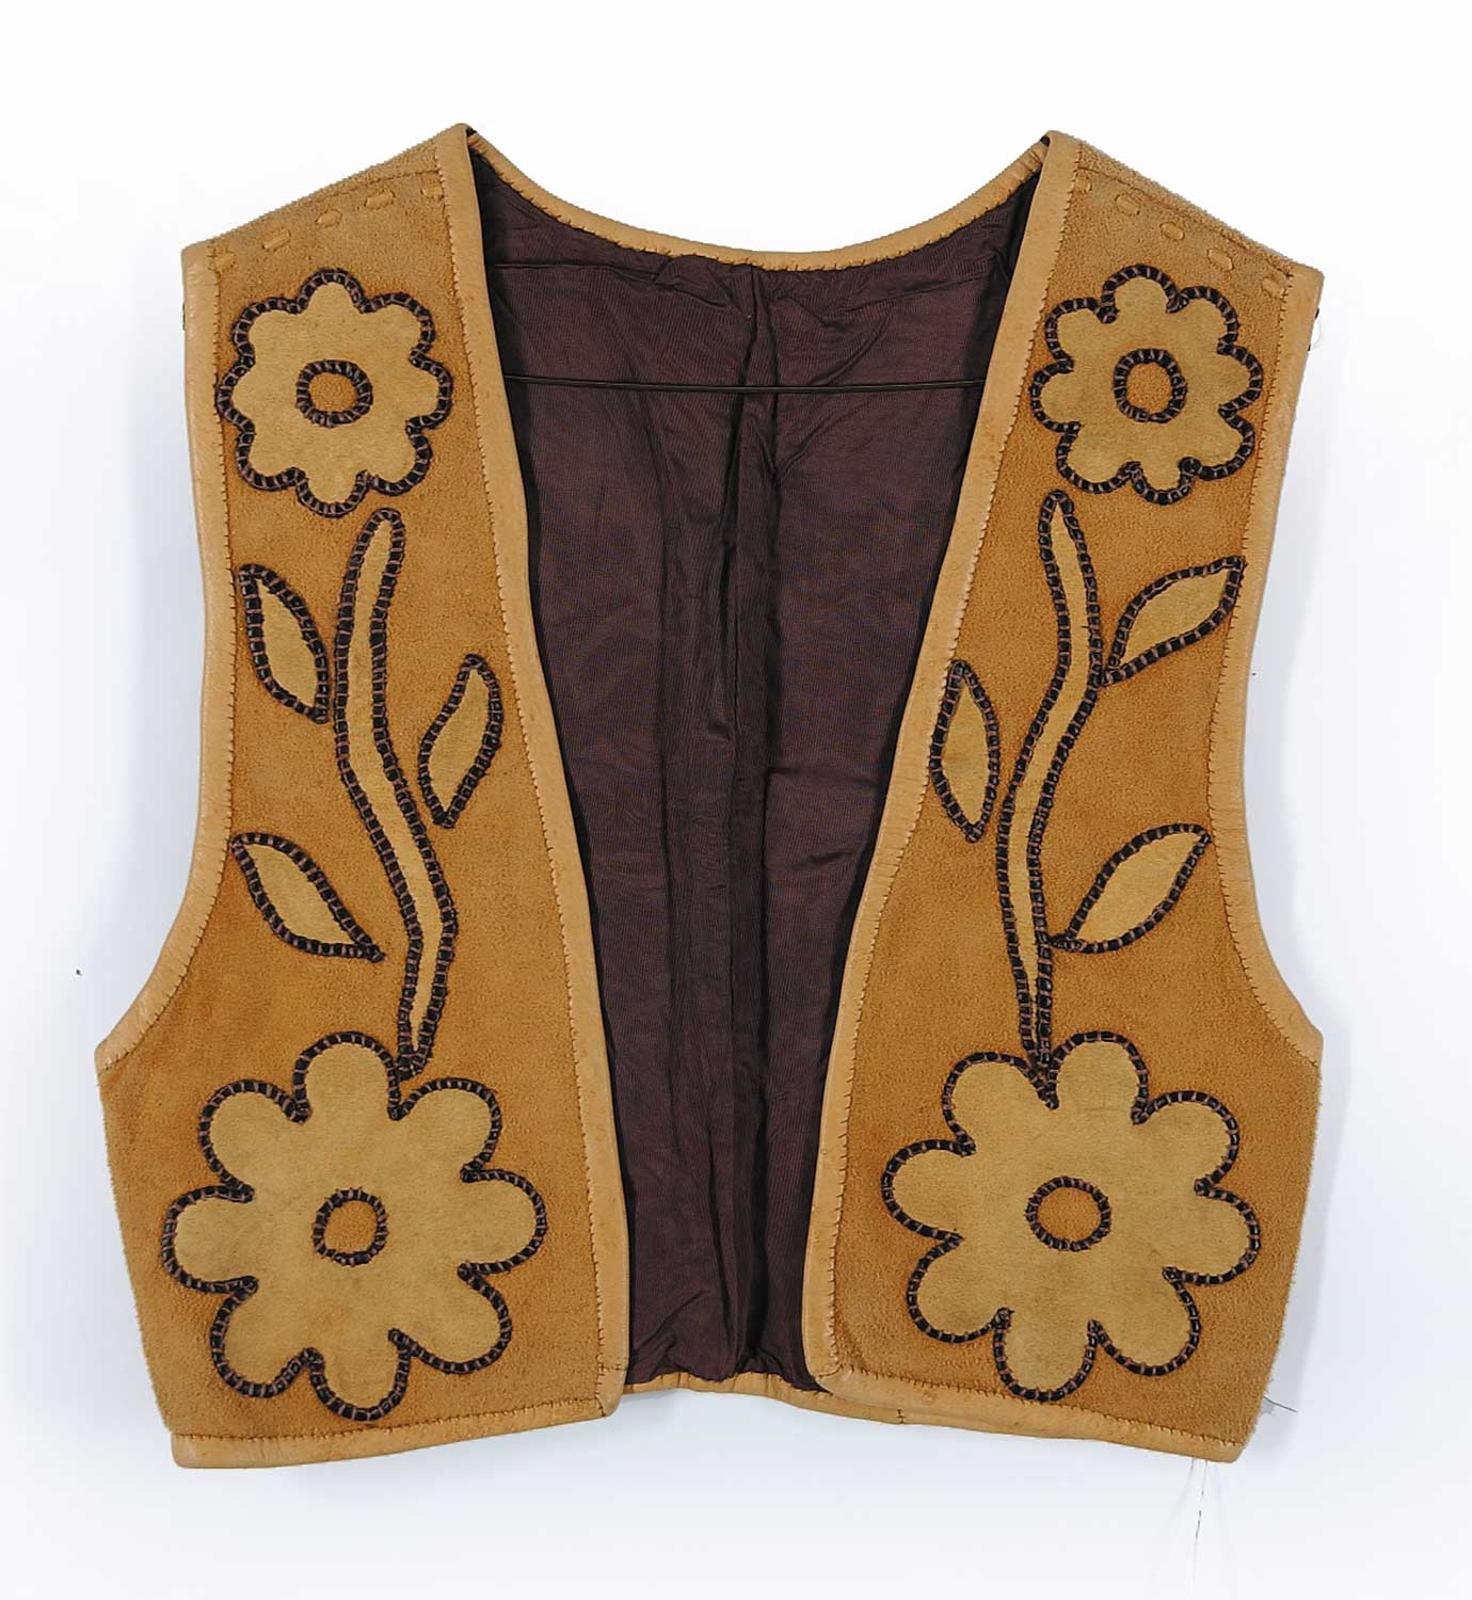 Robert Charles Aller (1922-2008) - Untitled - Leather Vest with Applique Flowers